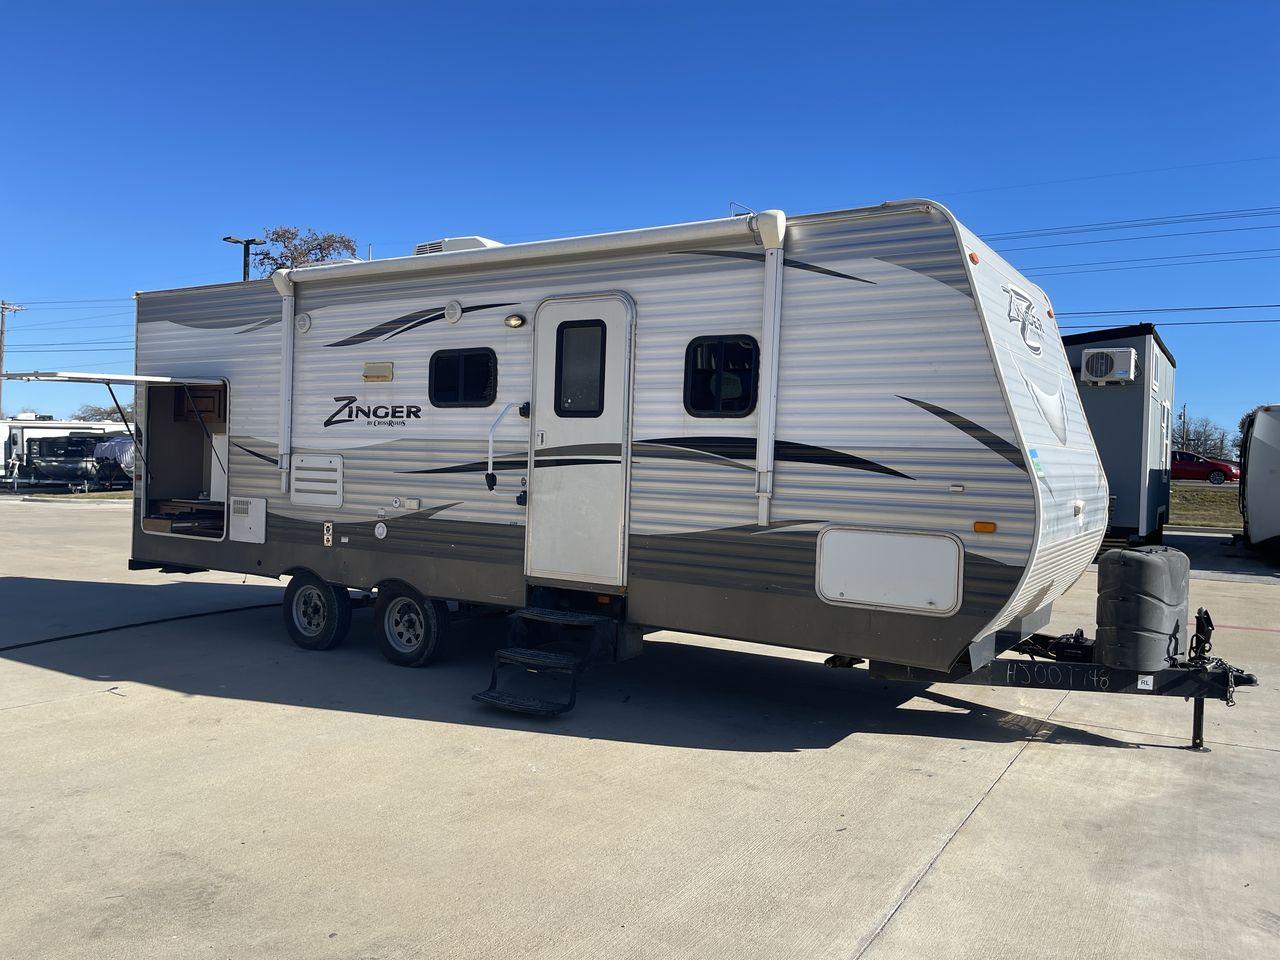 2017 WHITE CROSSROADS ZINGER 25RB (4V0TC2523HJ) , Length: 29.5 ft. | Dry Weight: 6,276 lbs. | Gross Weight: 7,870 lbs. | Slides: 1 transmission, located at 4319 N Main St, Cleburne, TX, 76033, (817) 678-5133, 32.385960, -97.391212 - Photo #20